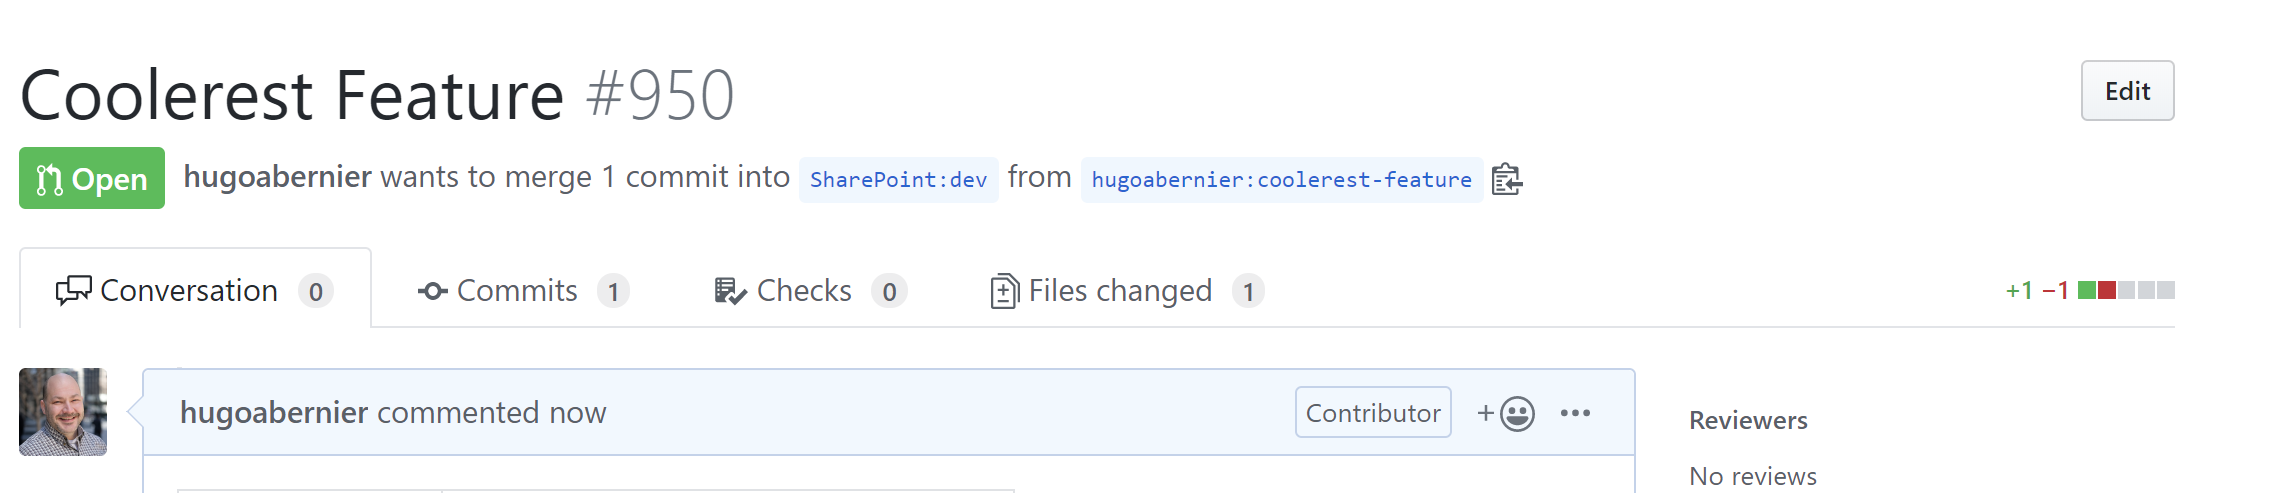 New open pull request